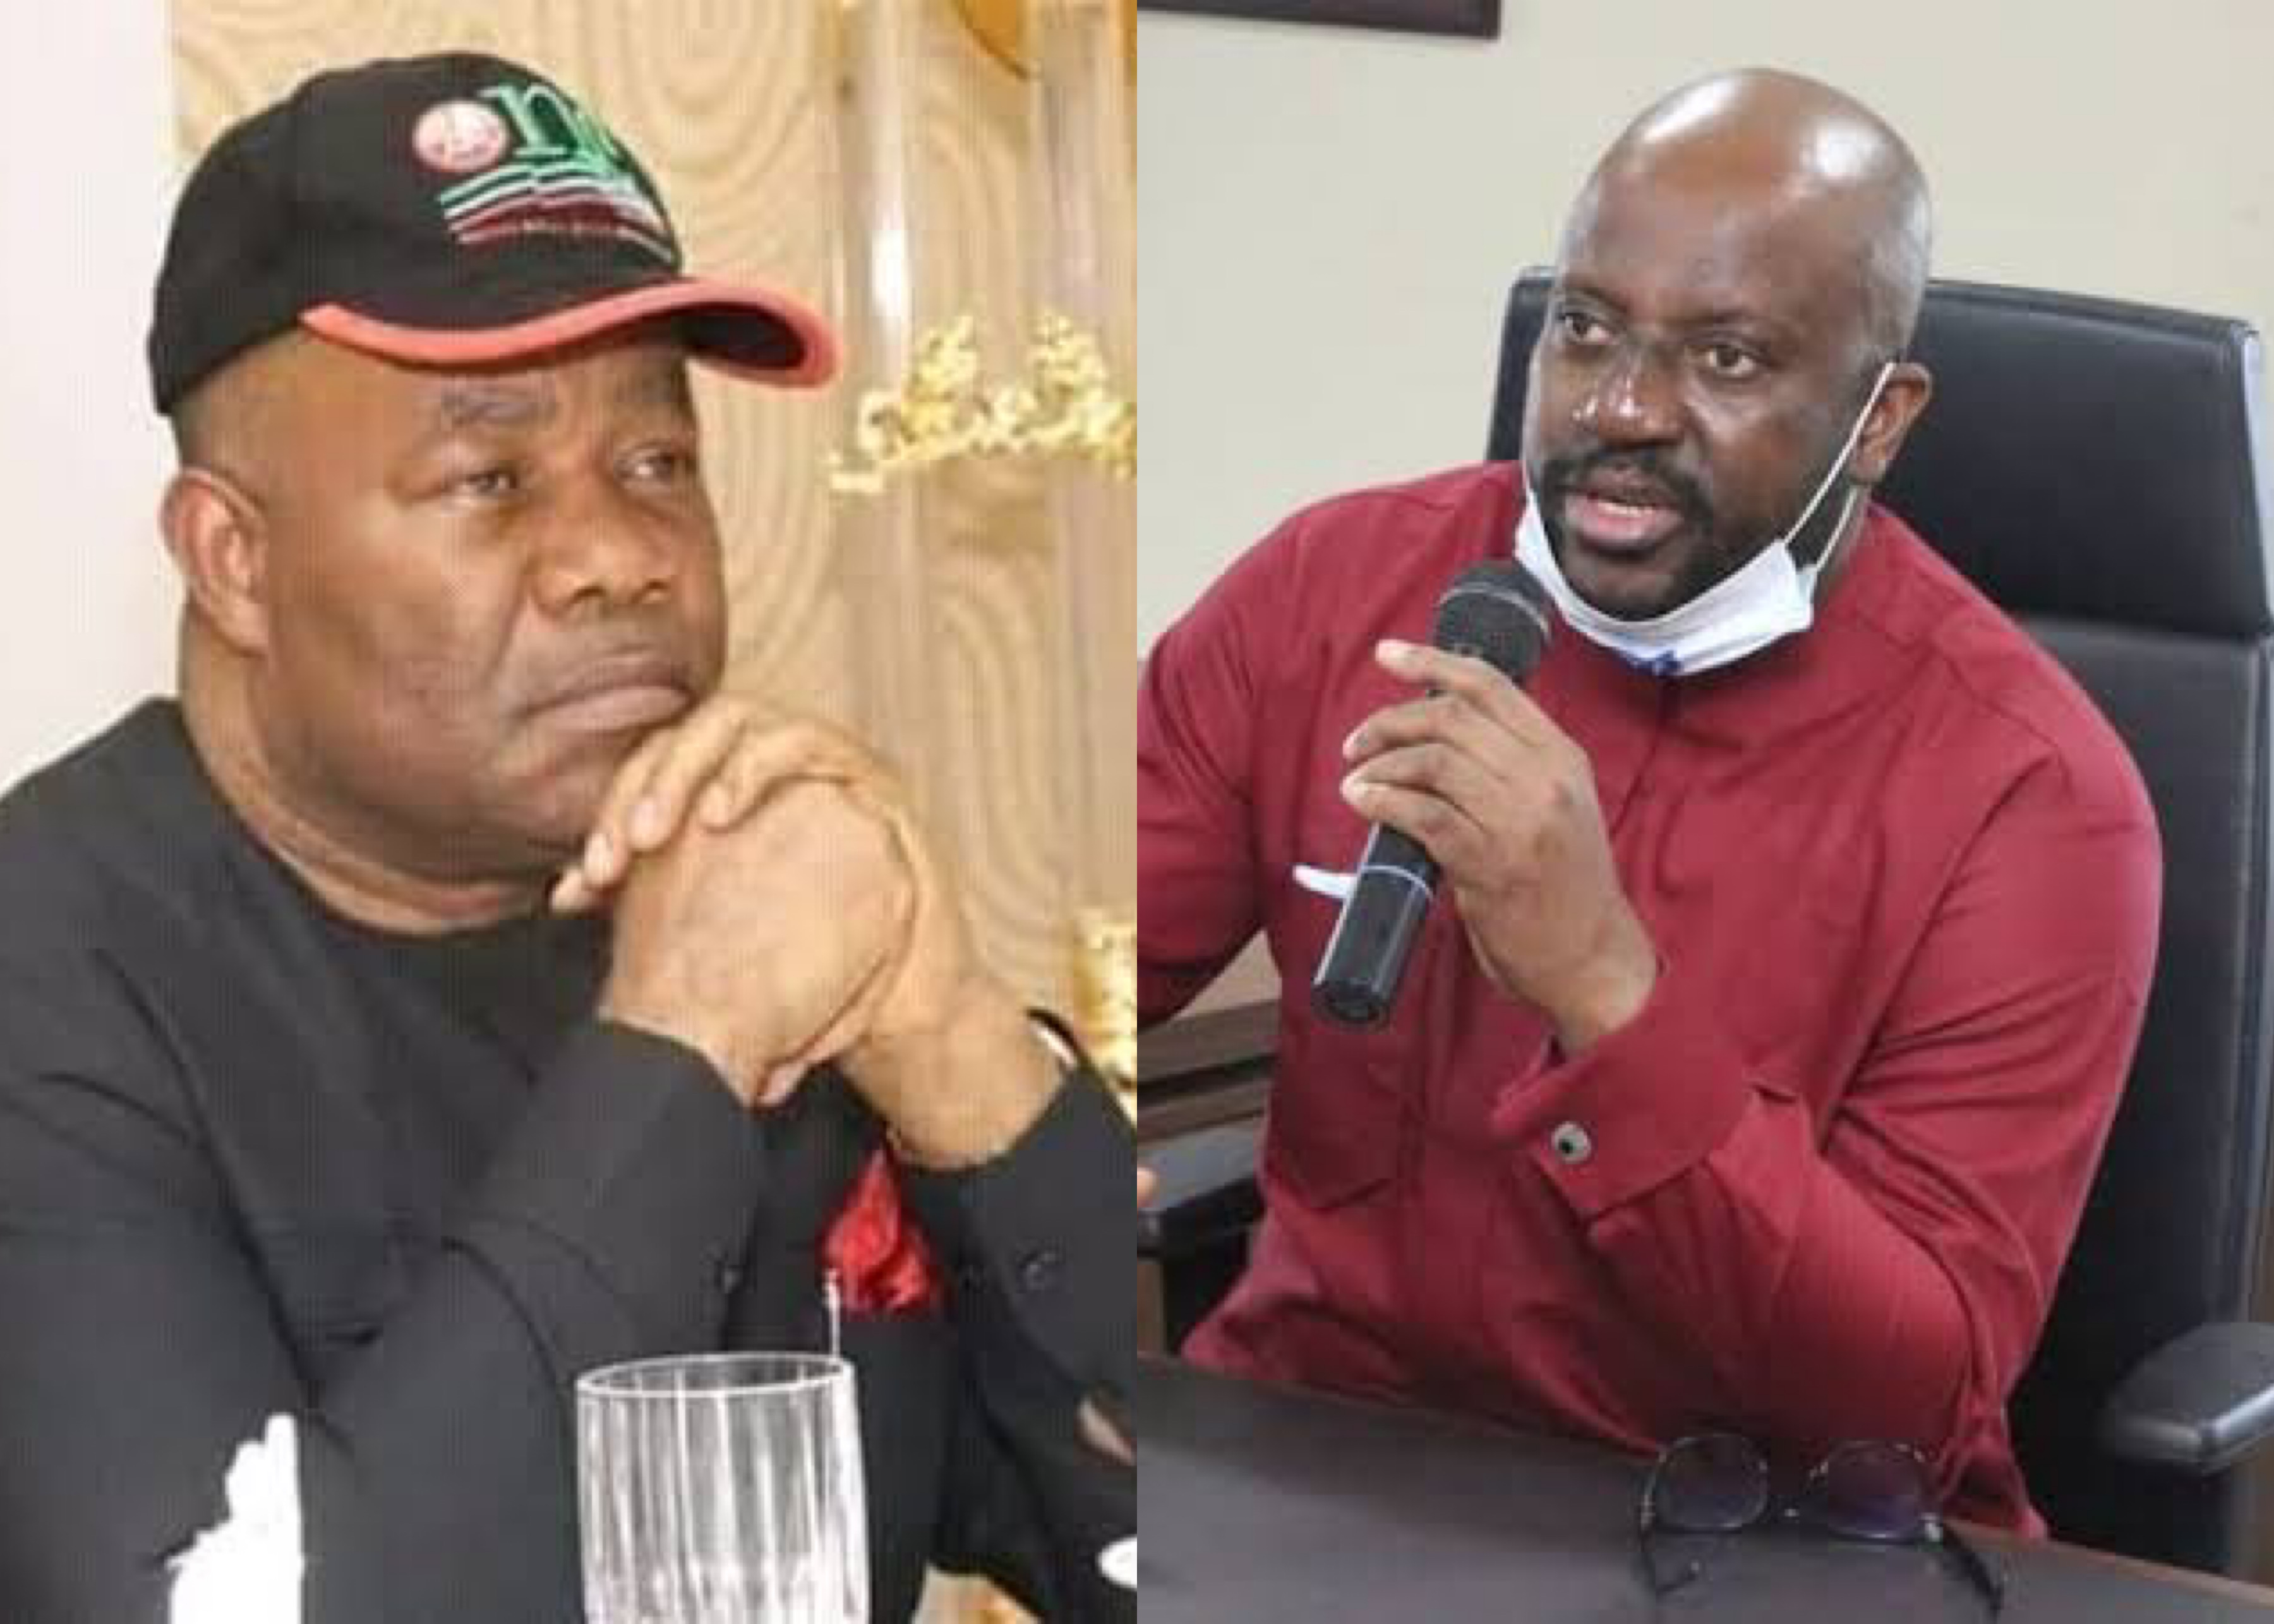 L-R: Minister of Niger Delta Affairs, Godswill Akpabio and the acting Managing Director of the Niger Delta Development Commission, Prof Kemebradikumo Pondei.